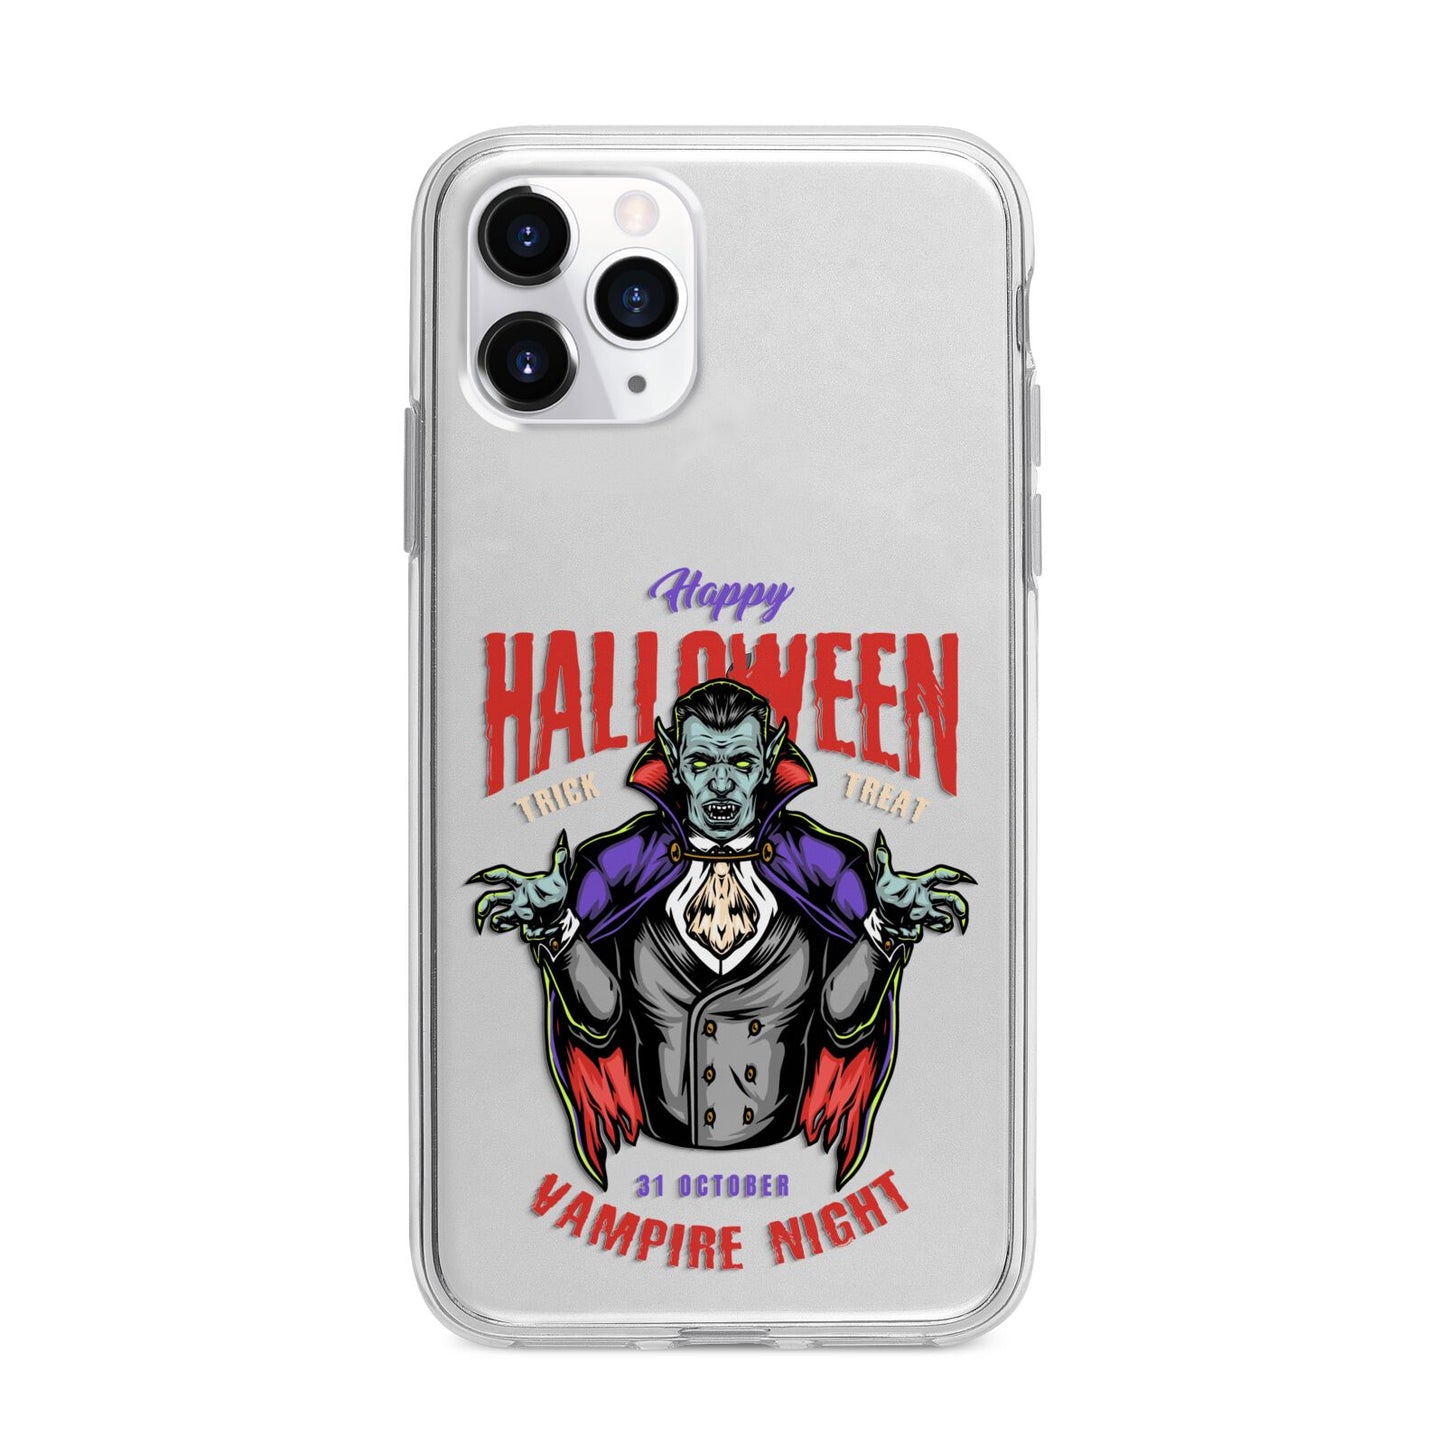 Vampire Night Apple iPhone 11 Pro Max in Silver with Bumper Case